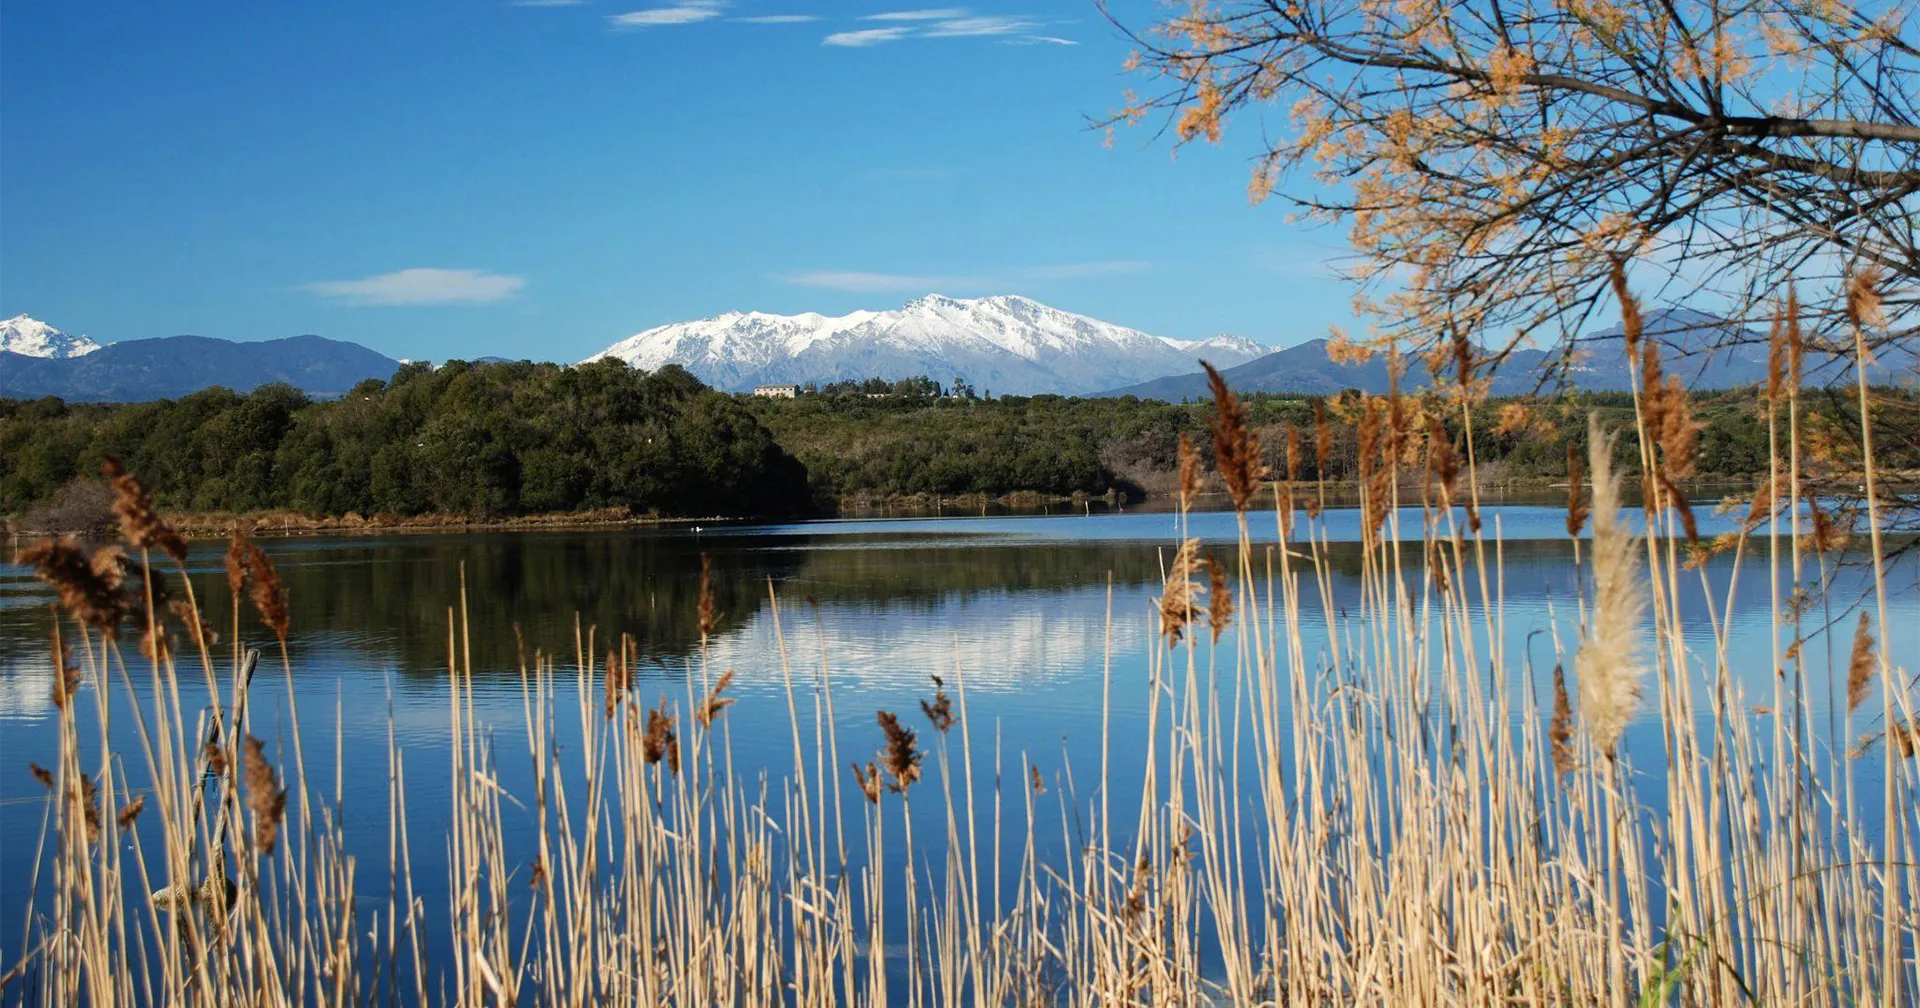 From the Domaine de Riva, enjoy magnificent views of the snowy mountains in winter.